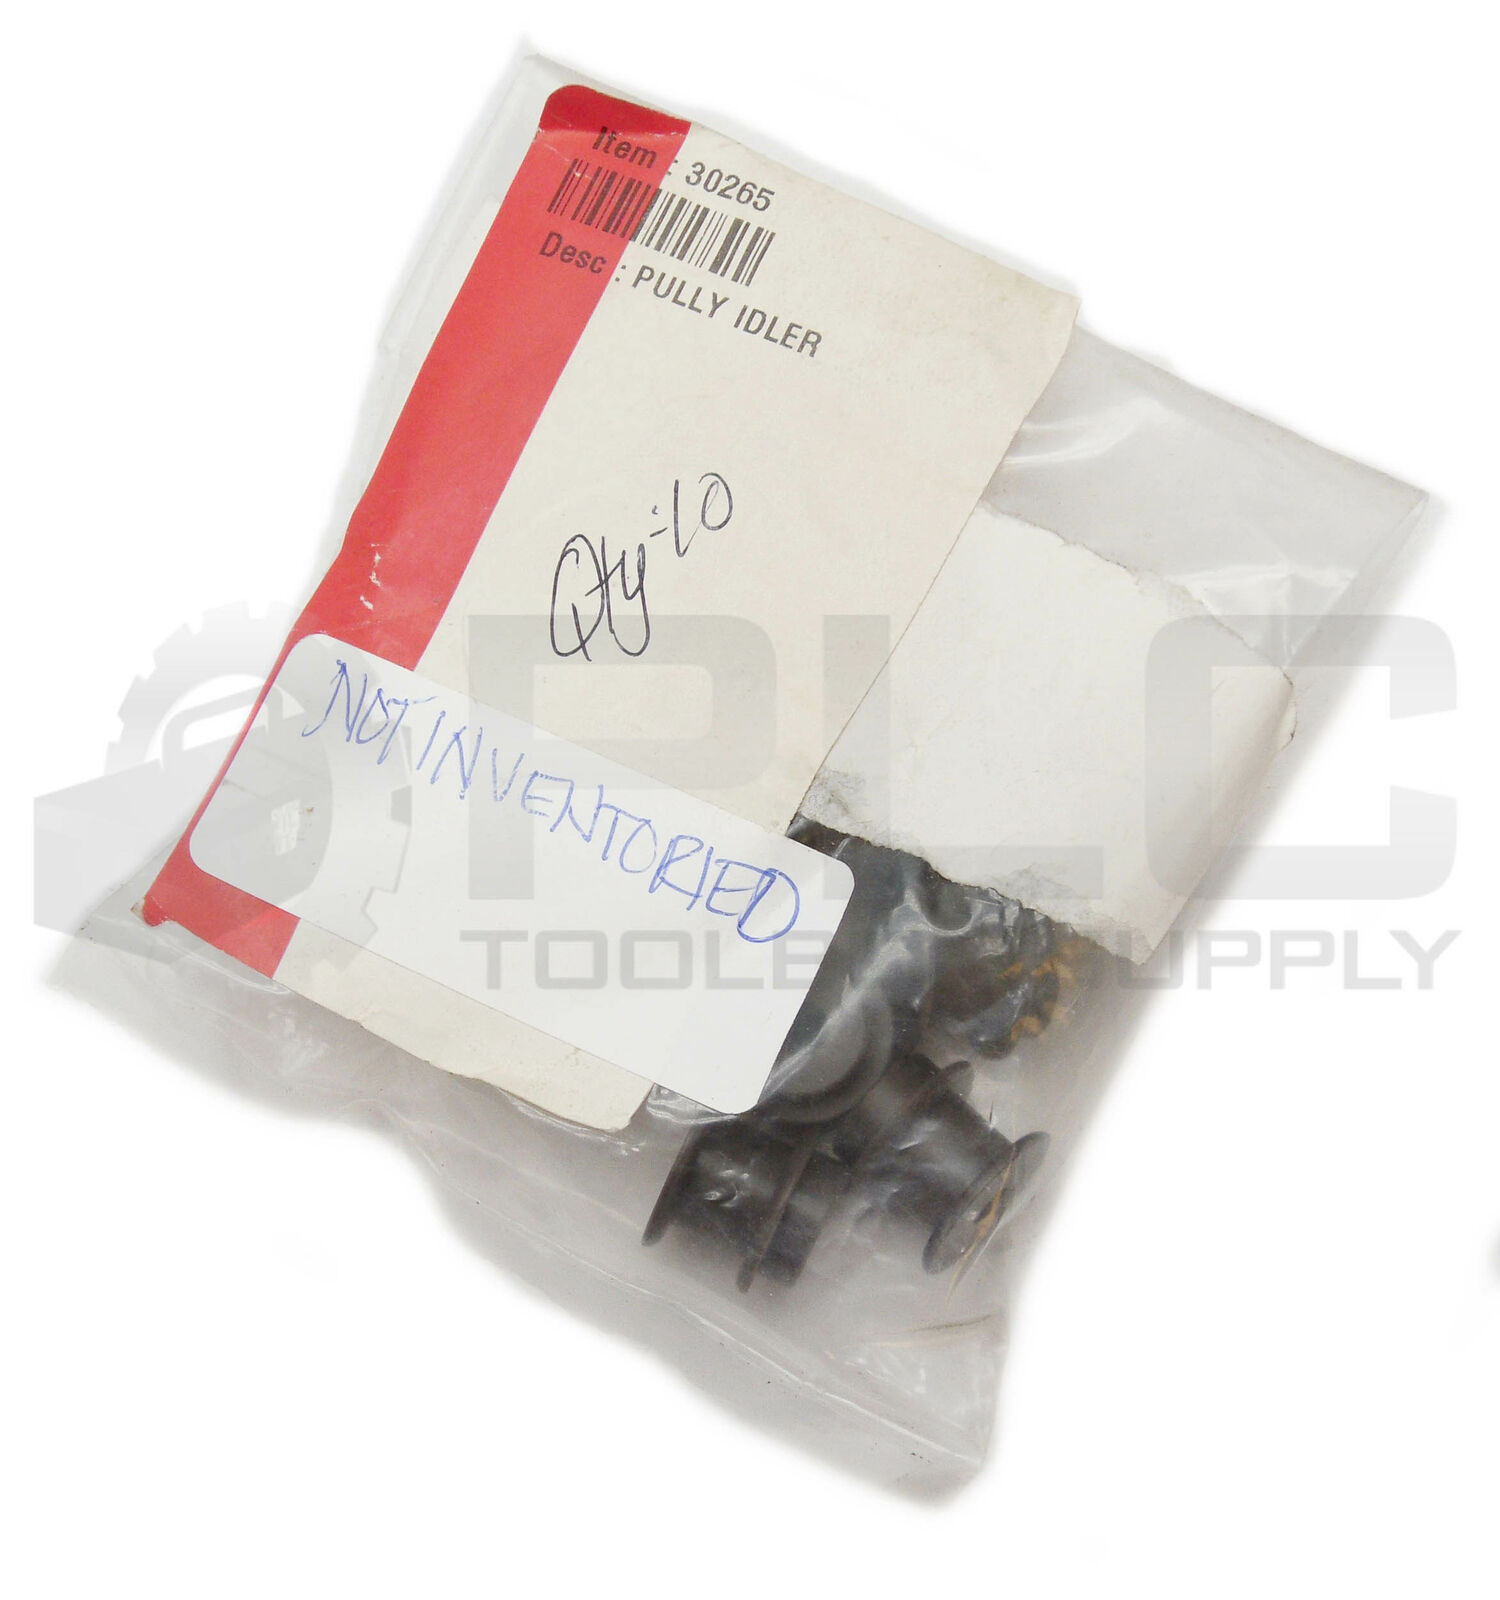 BAG OF 10 NEW 30265 PULLEY IDLER